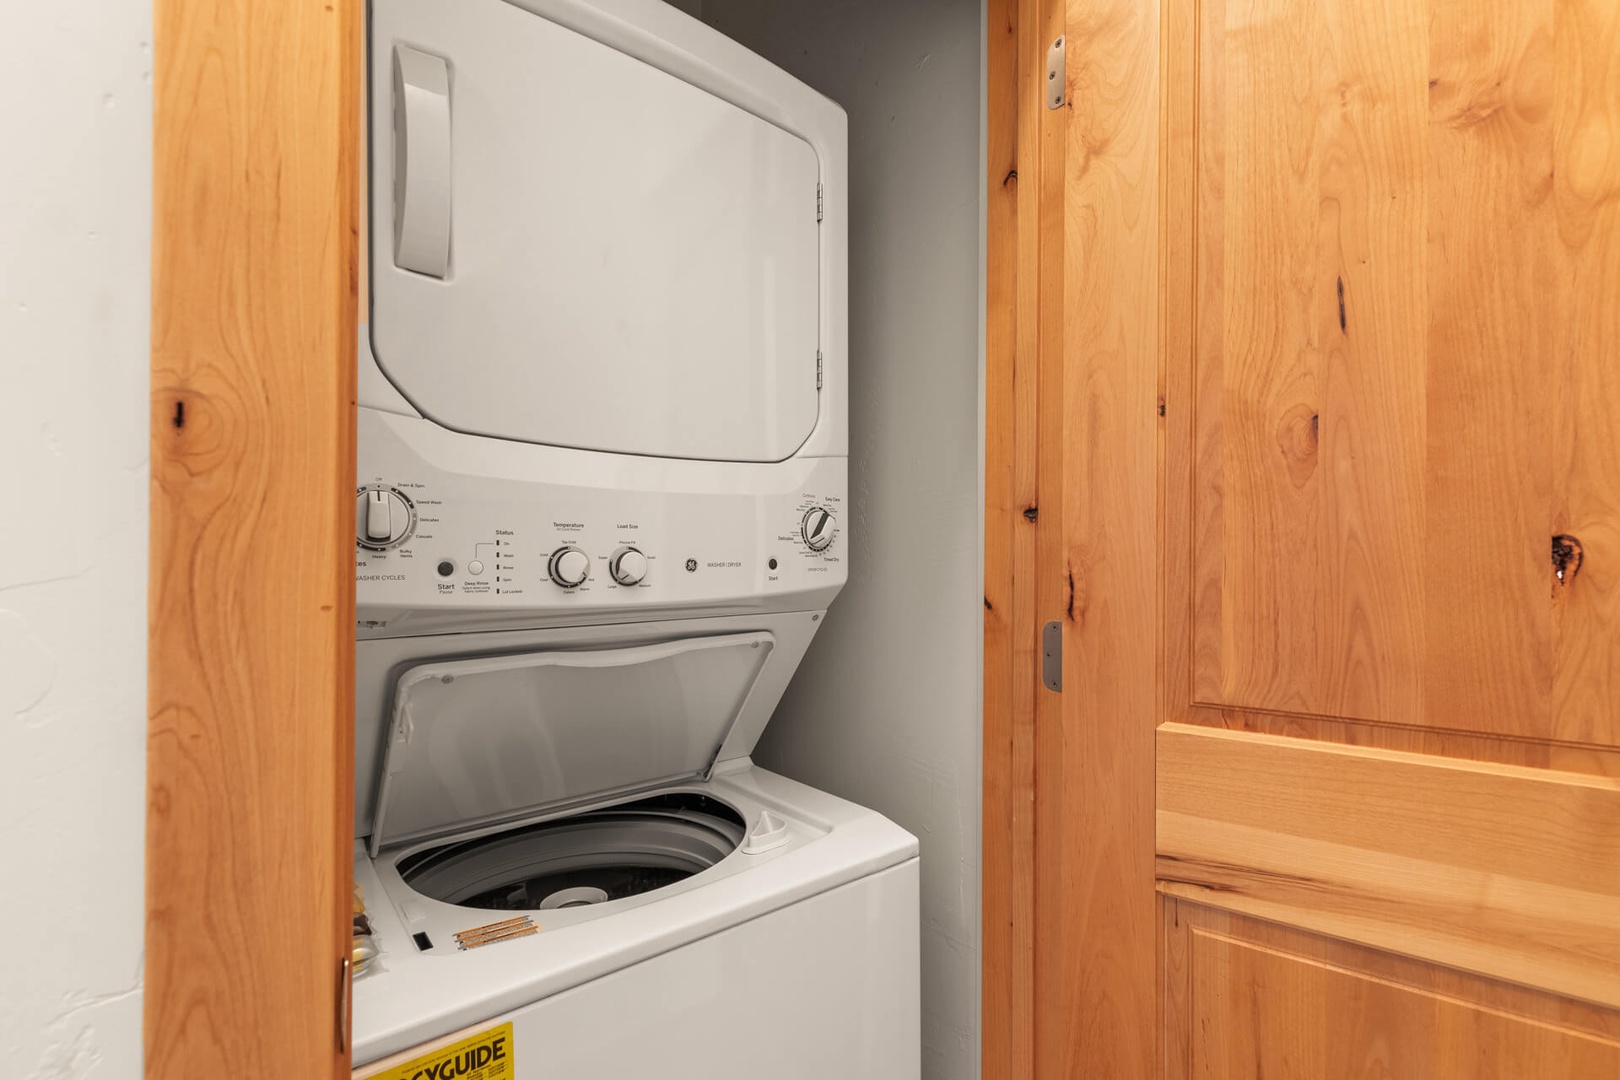 Bear Hollow Lodges 1313:  A full-sized washer and dryer is located in the condo for easy laundry after a full day of mountain adventure.